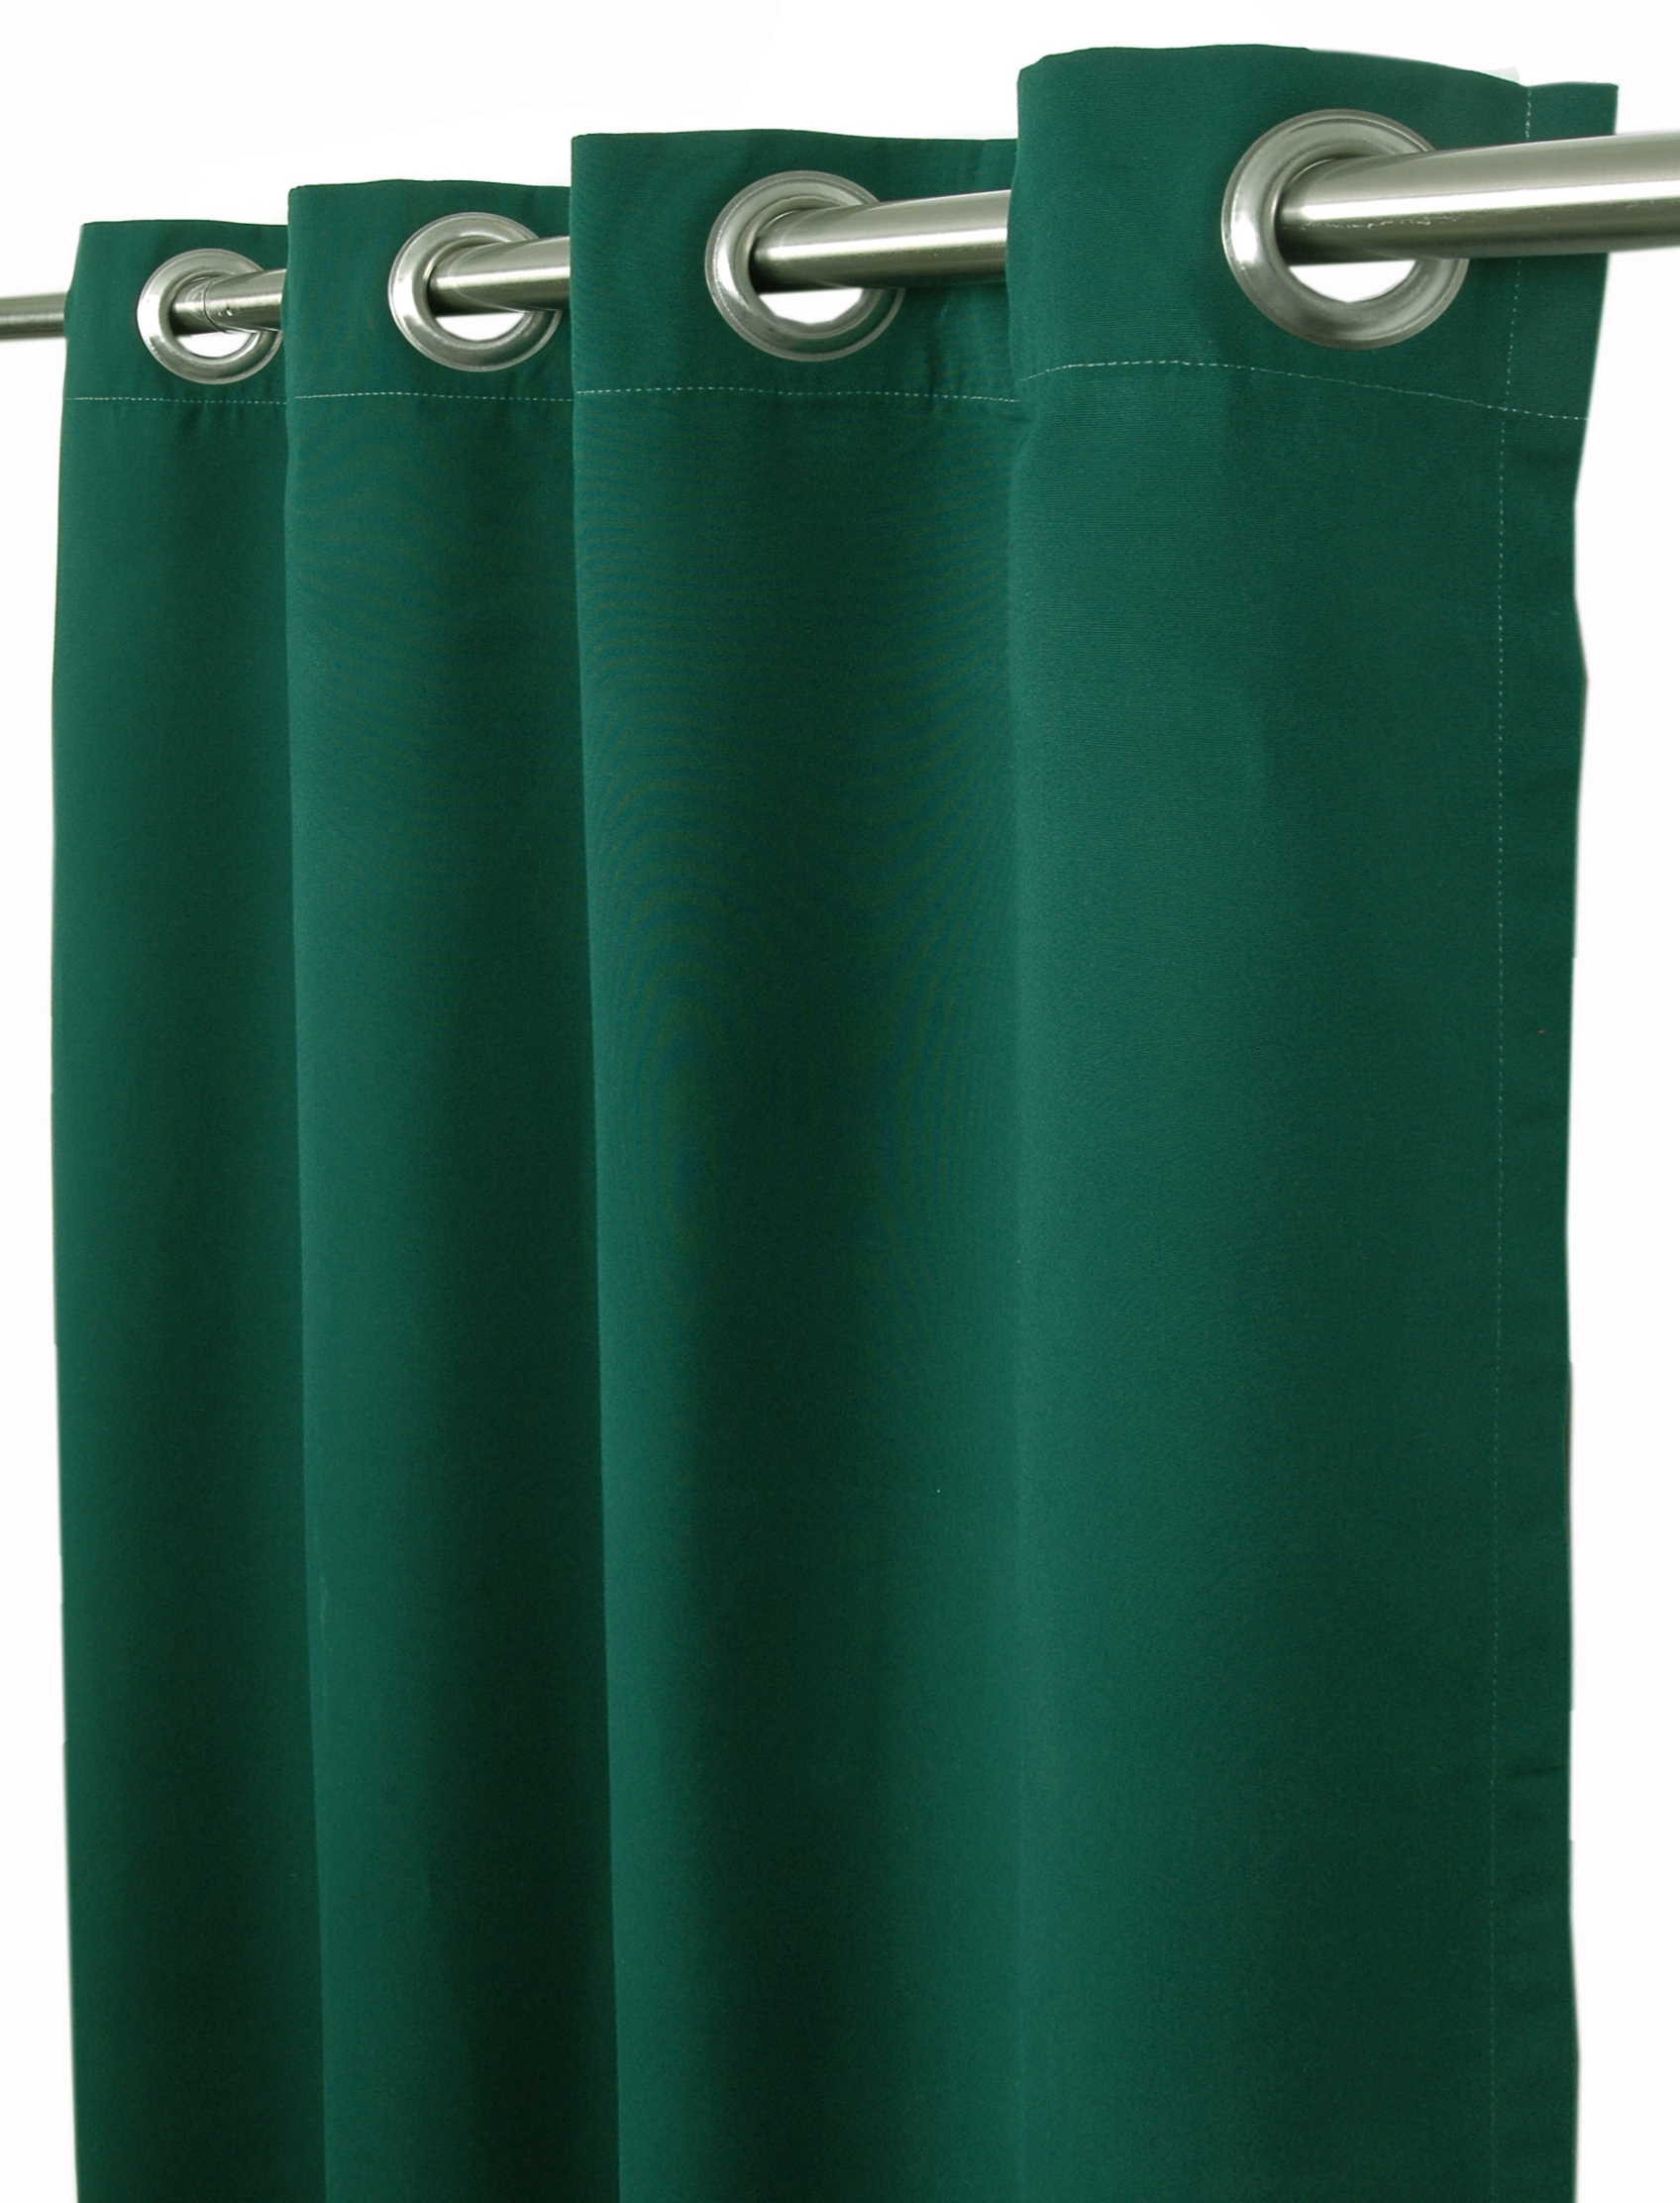 Sunbrella Canvas Forest Green Indoor/Outdoor Curtain Panel by Sweet Summer Living, 50" x 96" with Stainless Steel Grommets - image 1 of 1